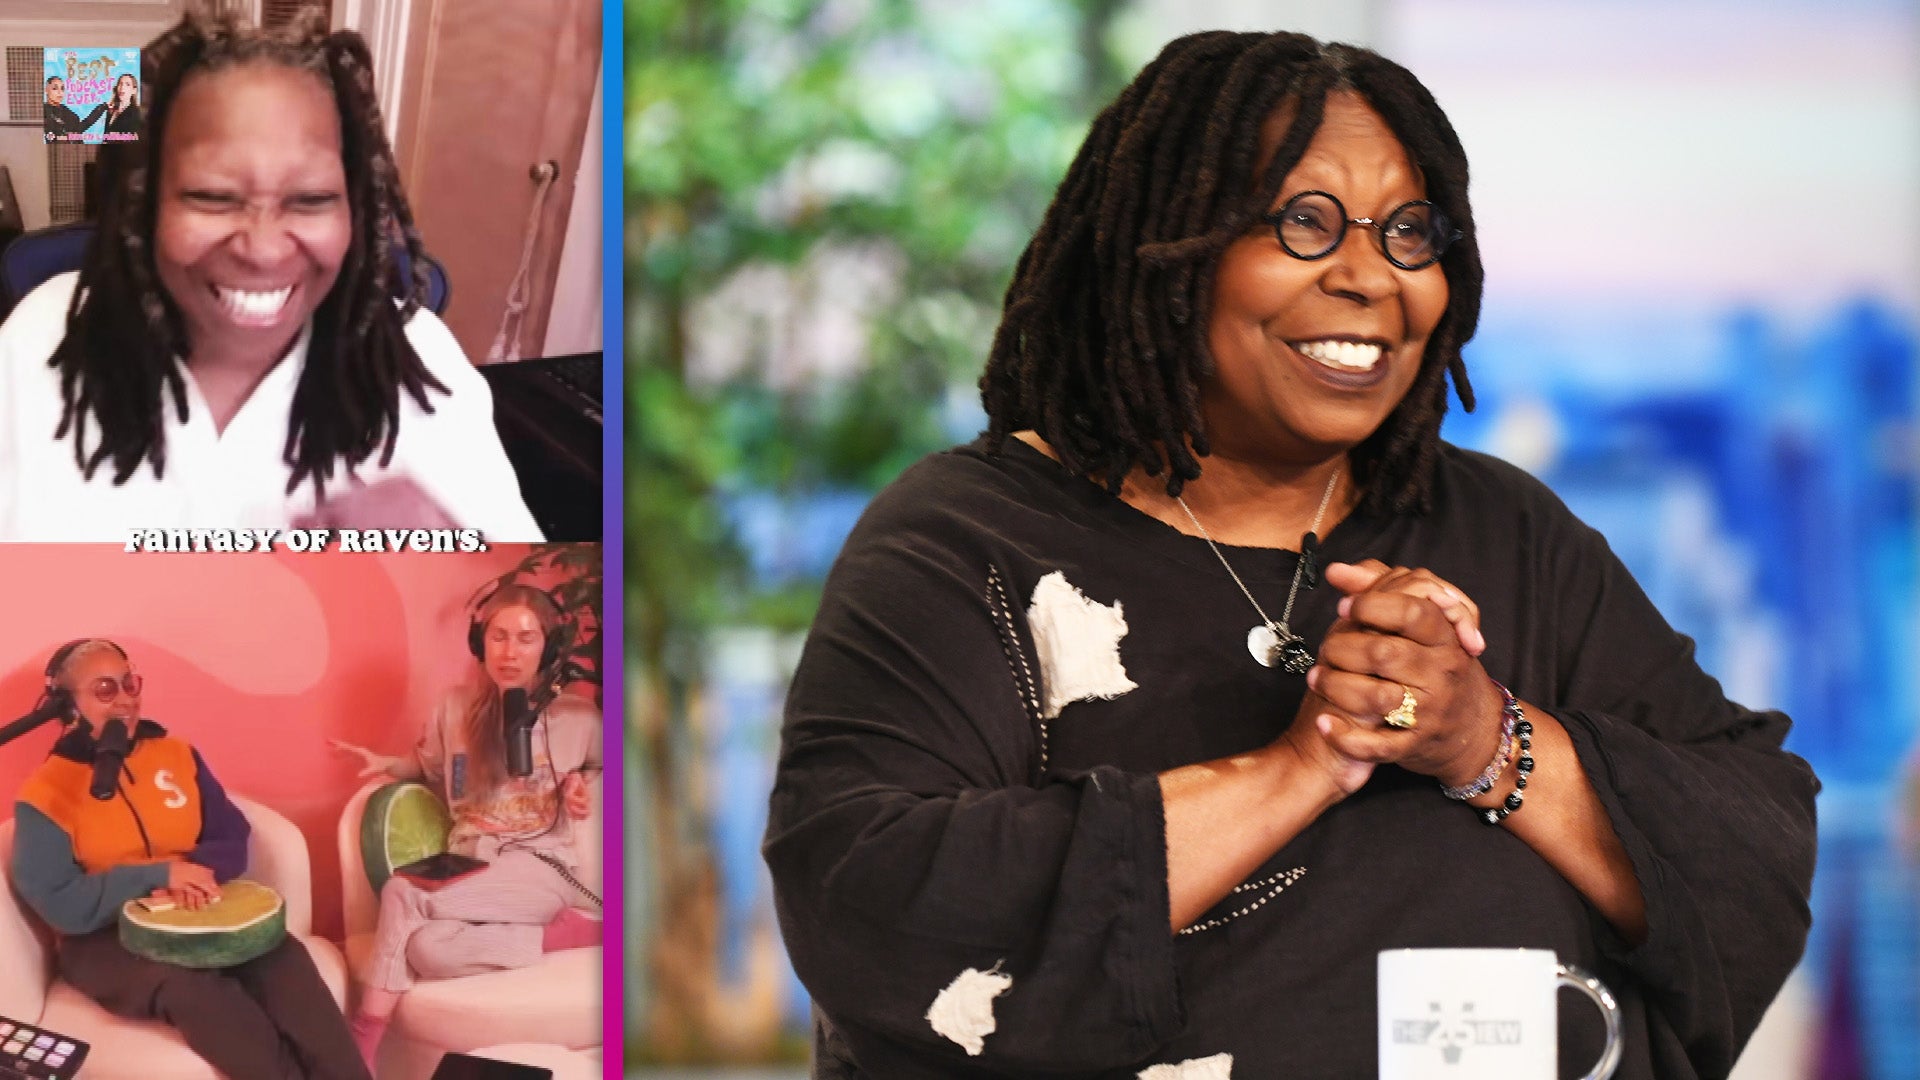 Whoopi Goldberg Reacts to Raven-Symoné Telling Her She Gives Off 'Lesbian Vibes'